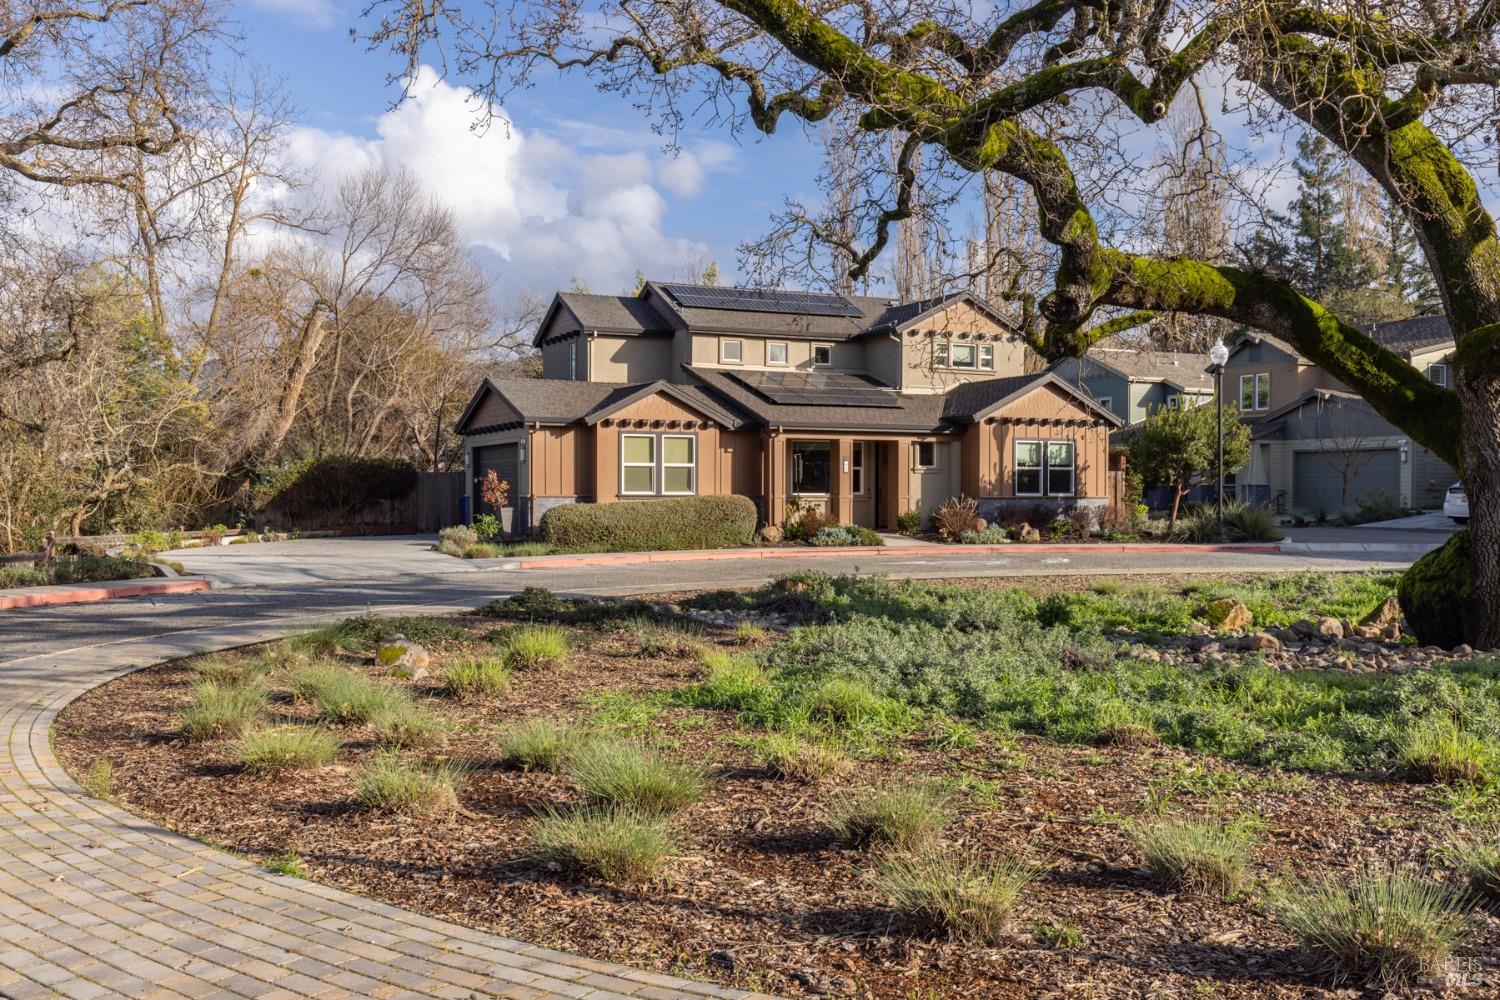 Looking for that perfect neighborhood oasis in Napa?  The one with great neighbors, privacy, and nat